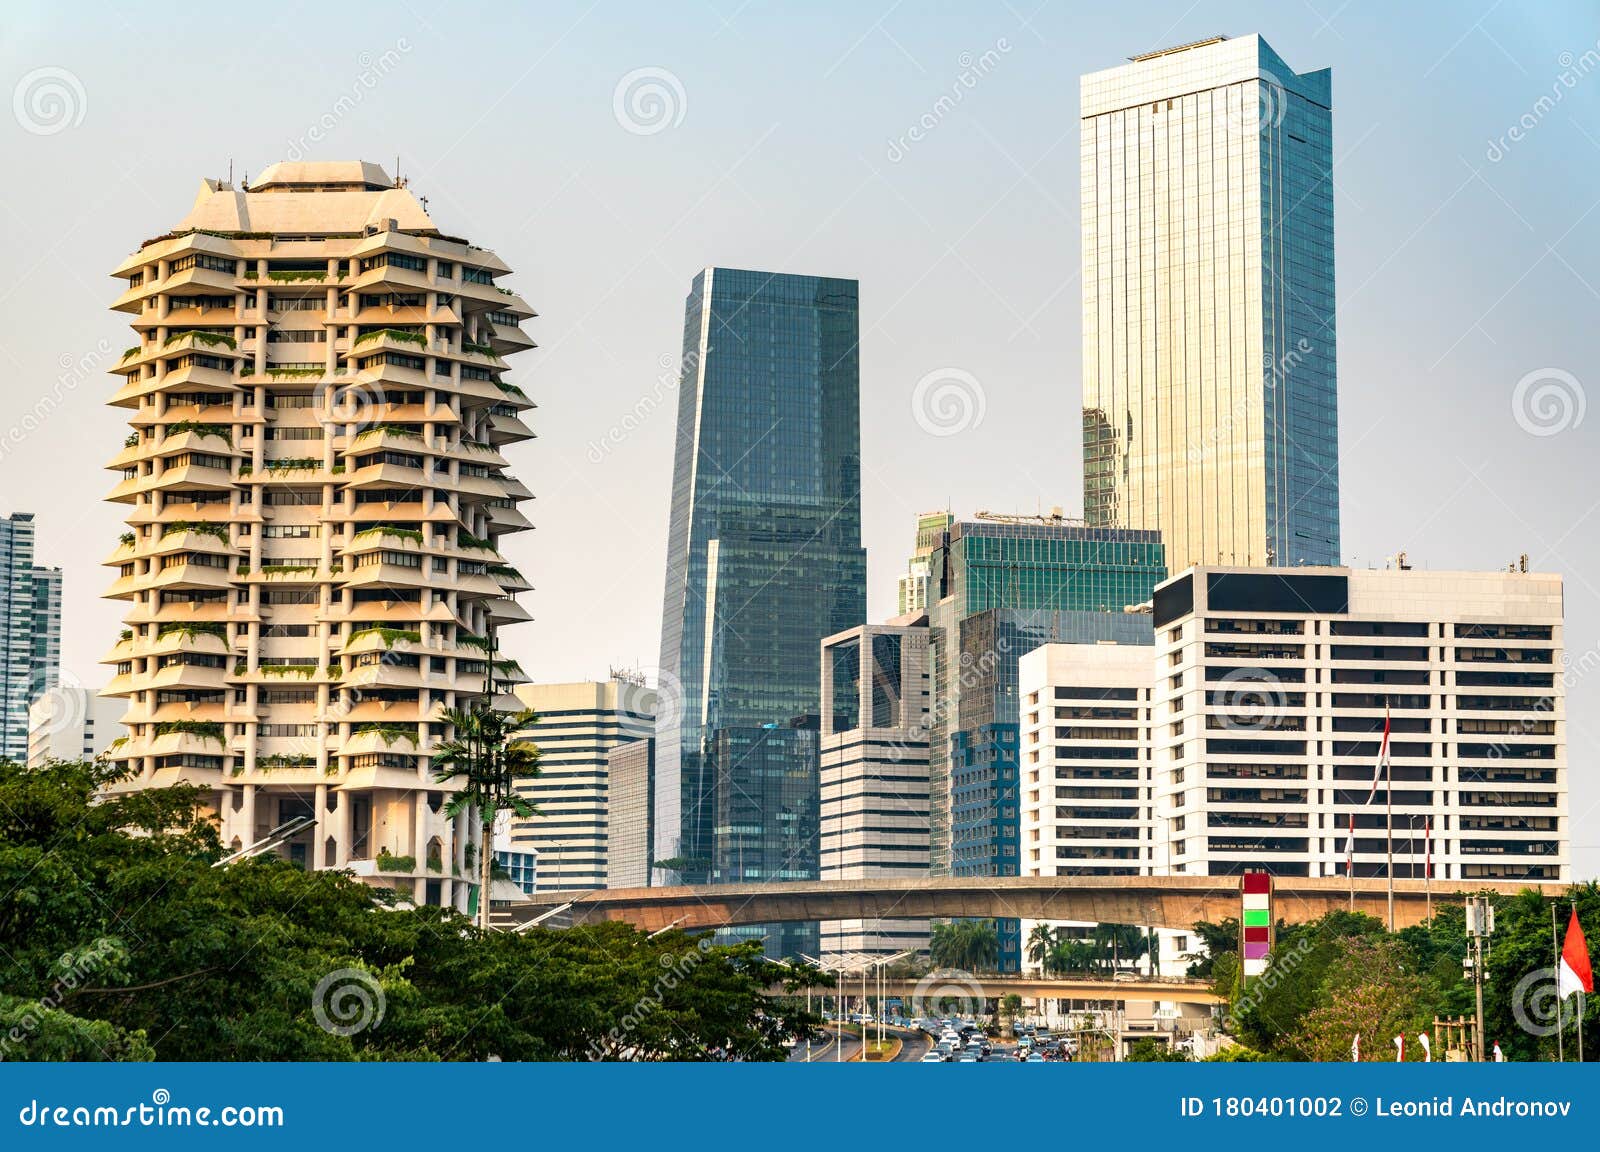  Jakarta  Central Business District  In Indonesia Stock Photo 